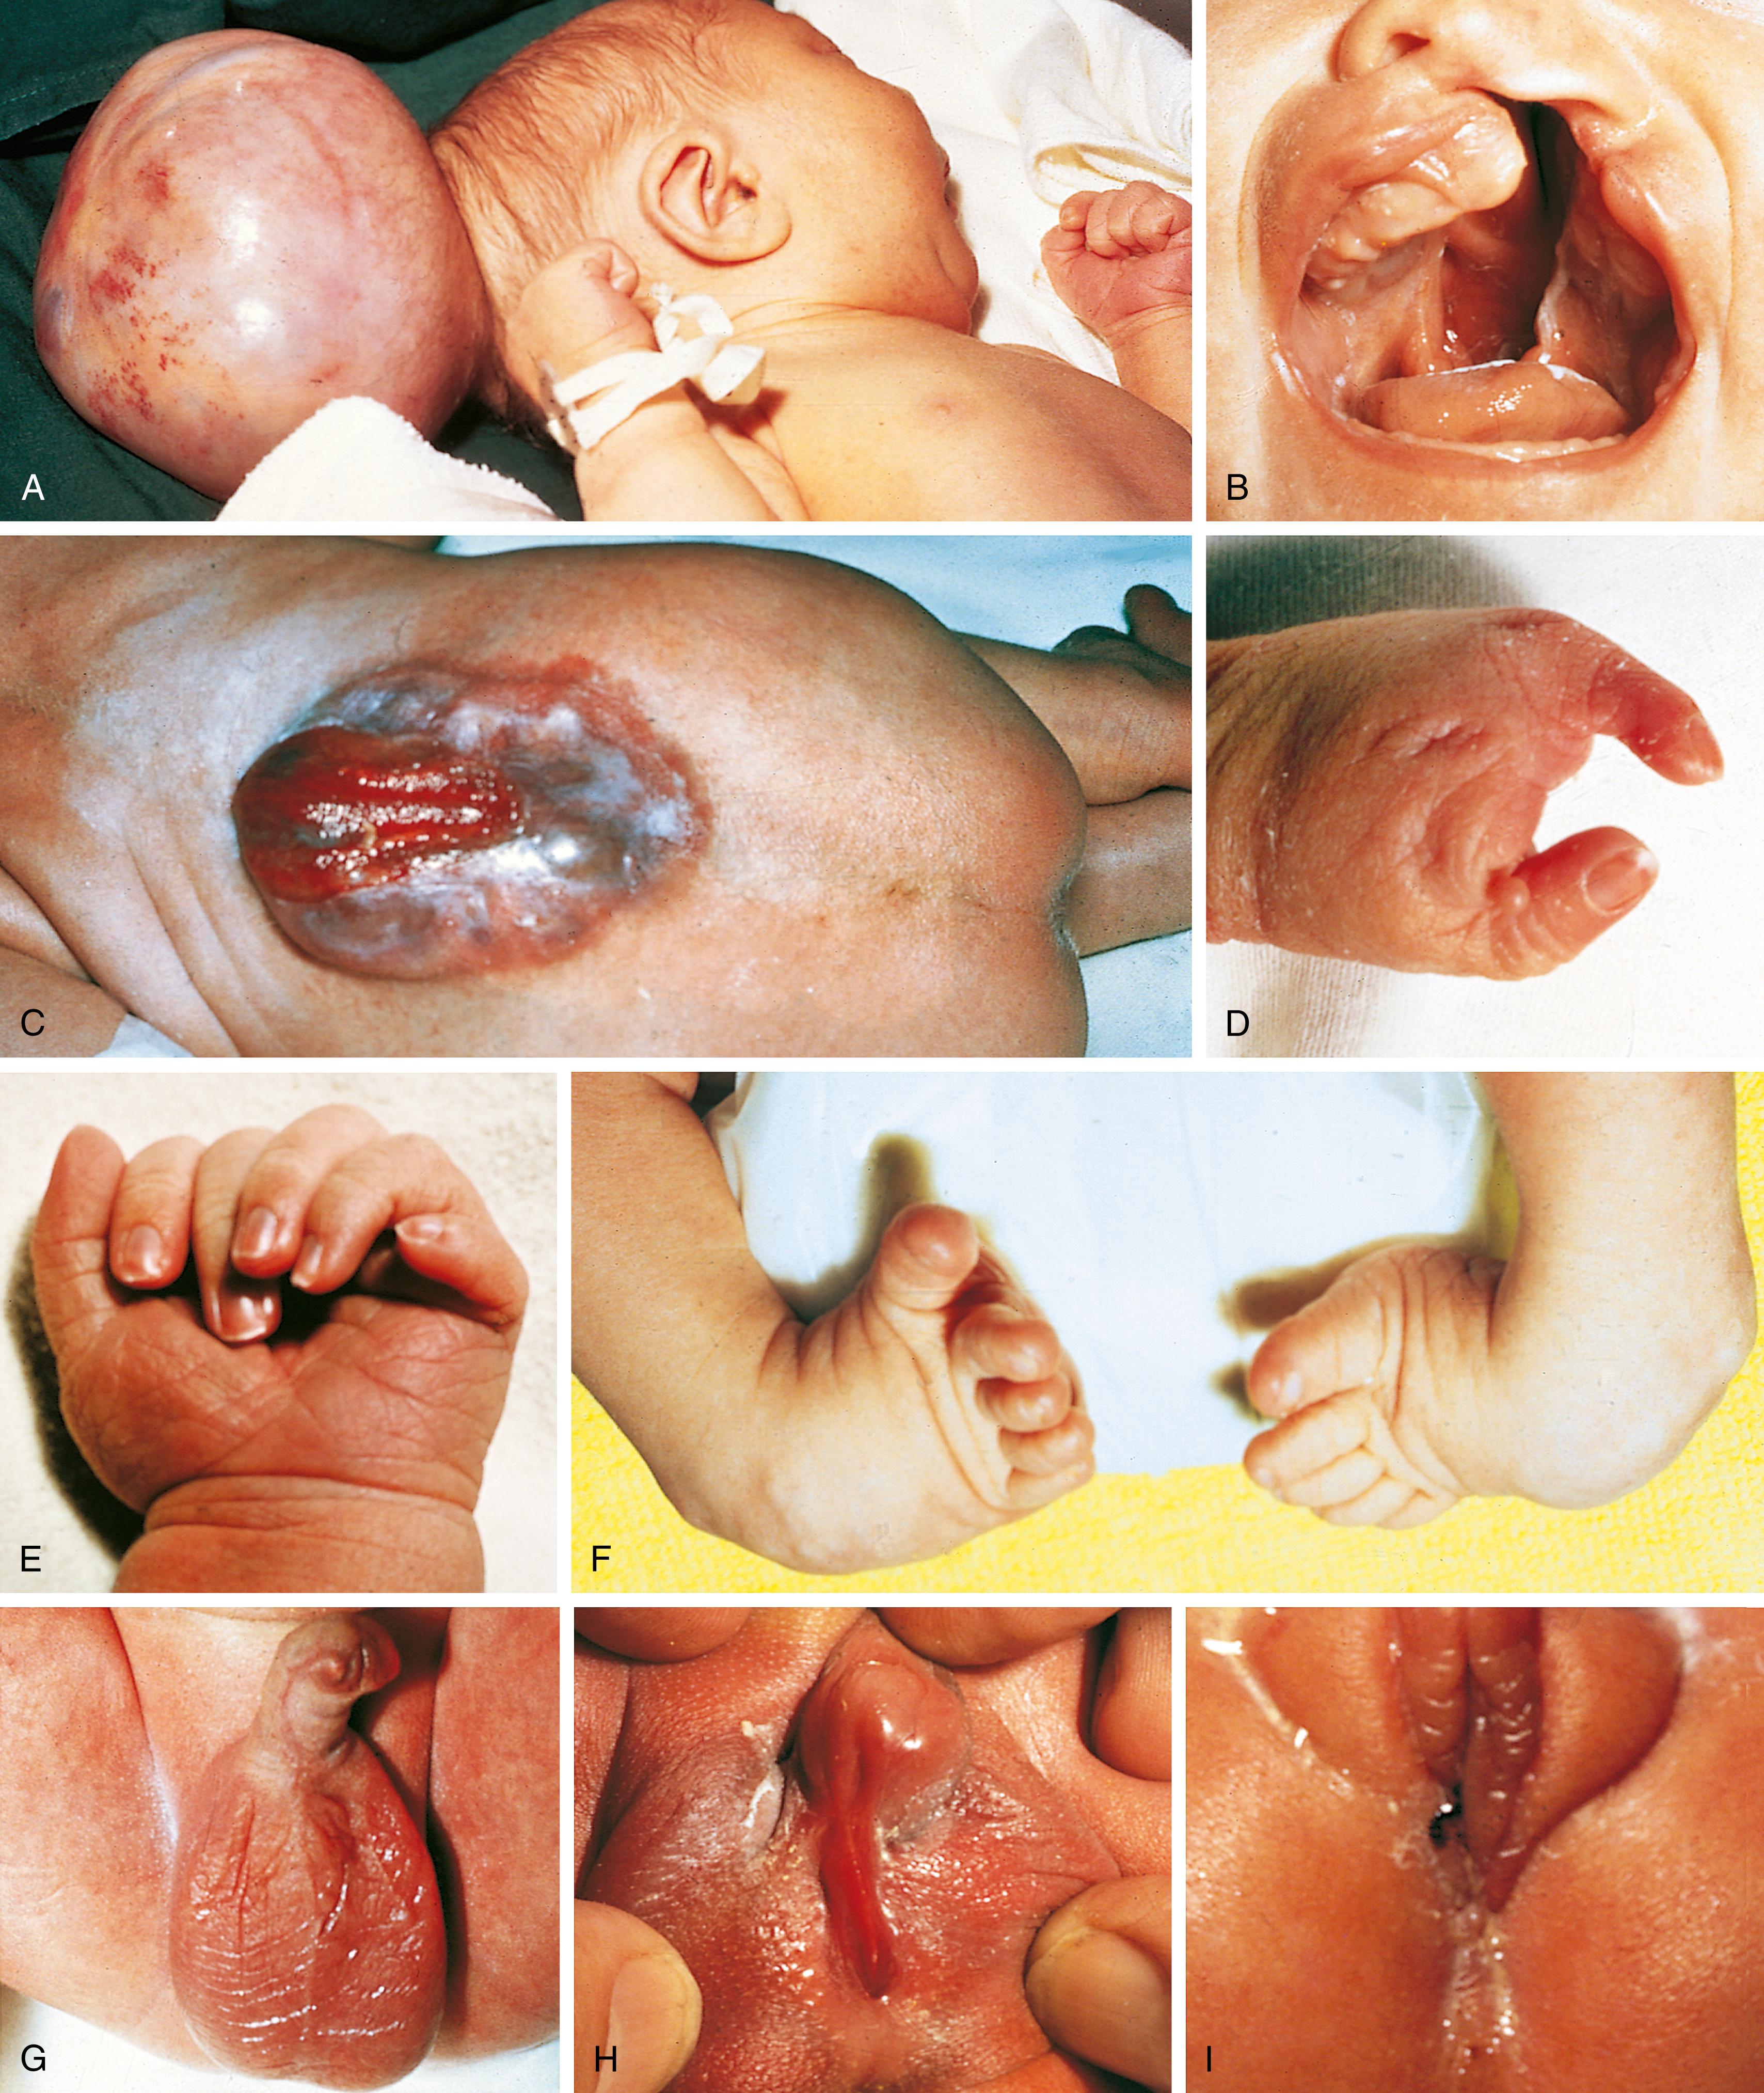 Fig. 1.2, Clinical photographs show several major anomalies seen at birth. (A) Encephalocele. (B) Cleft lip and palate. (C) Meningomyelocele. (D) Ectrodactyly (previously termed lobster-claw deformity ). (E) Polydactyly (postaxial). (F) Bilateral clubfoot. (G) Hypospadias. (H) Fused labia with enlarged clitoris. (I) Imperforate anus.